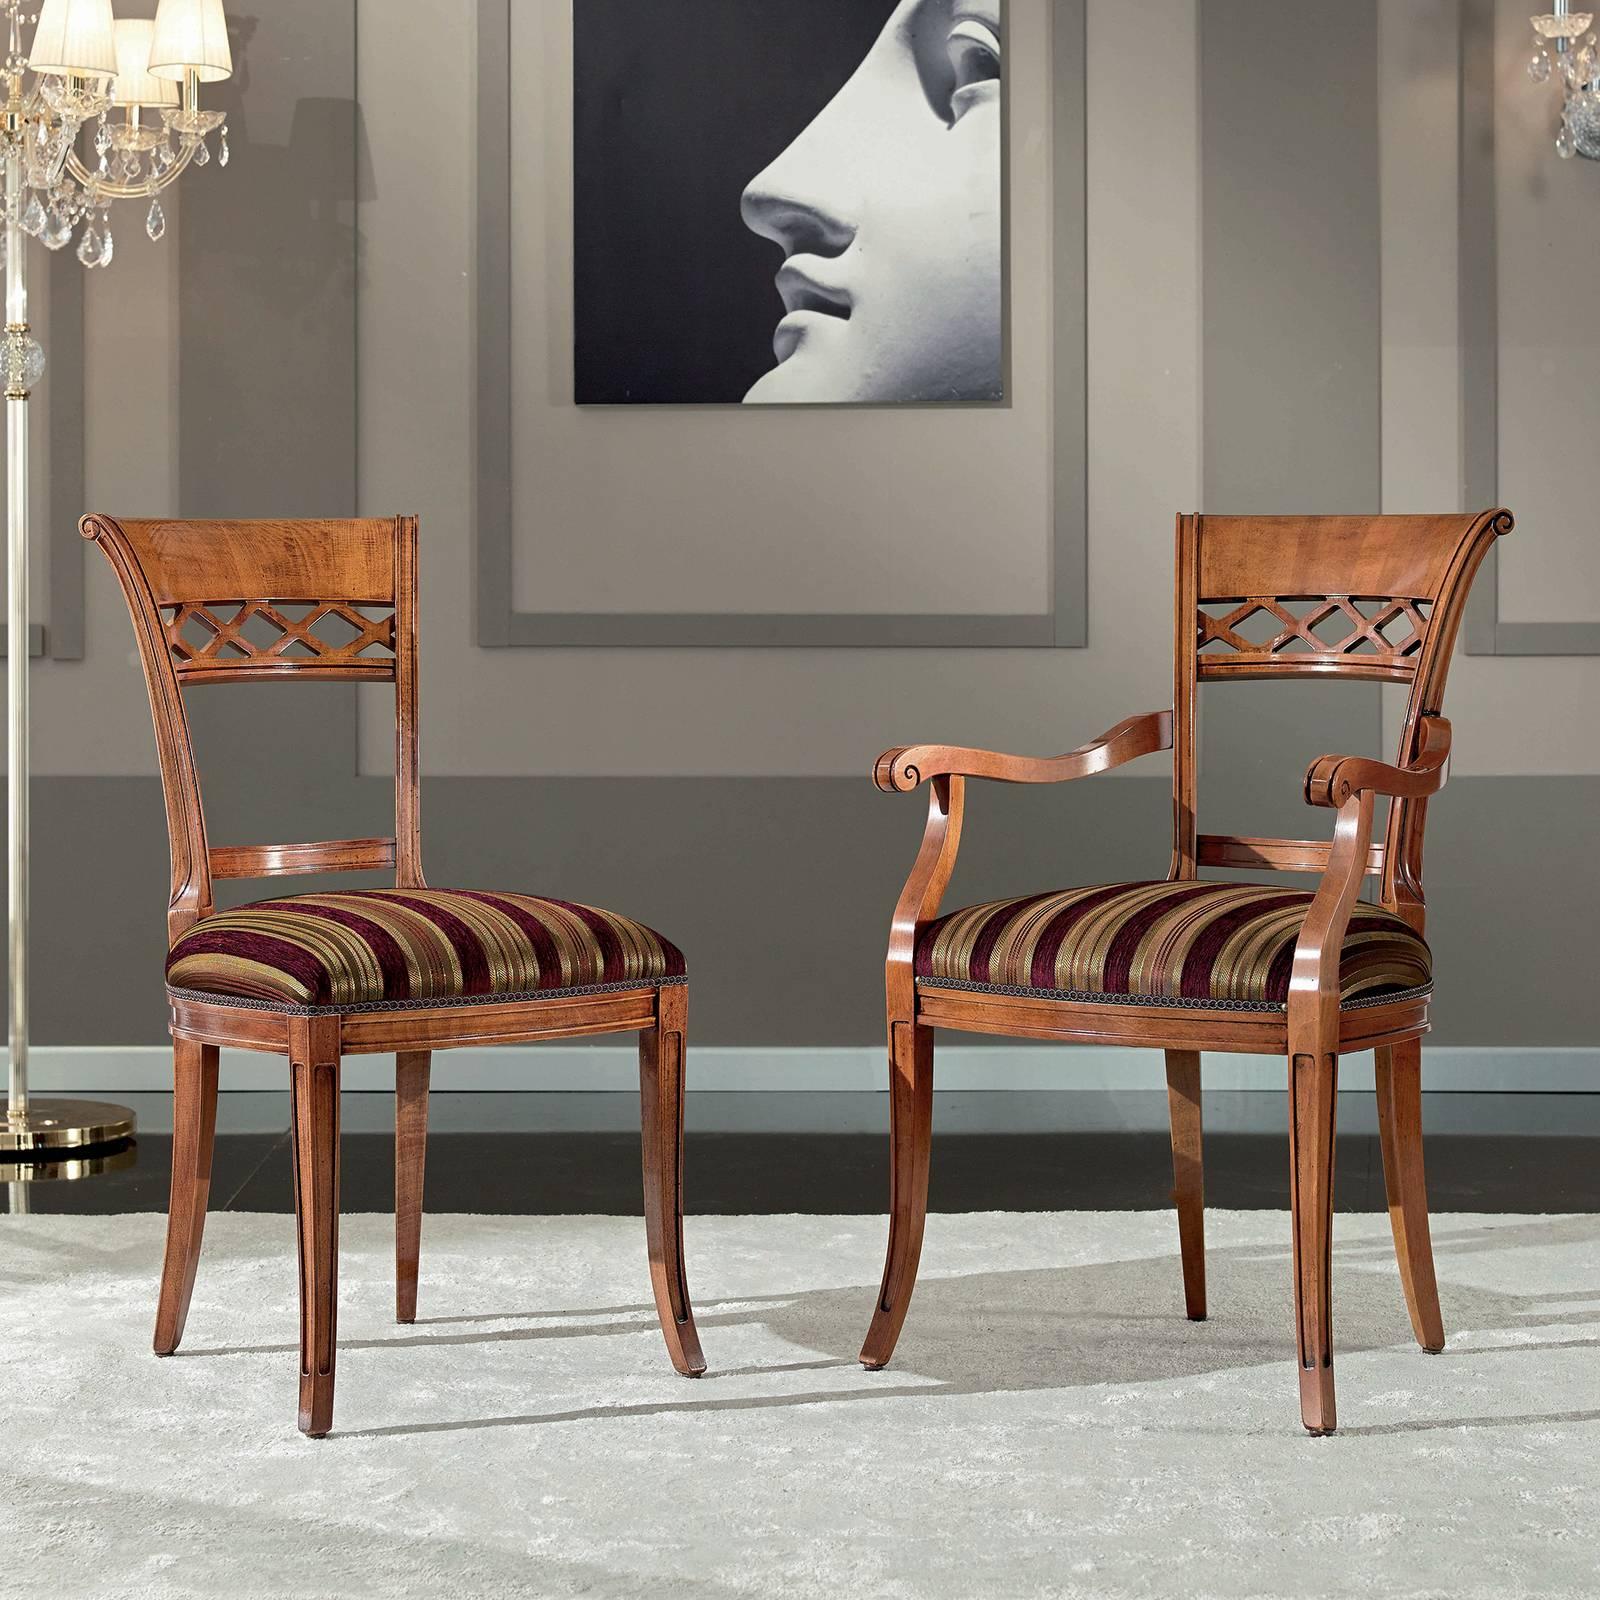 Fashioned entirely of wood, this classic chair will infuse timeless sophistication into any decor. The distinctive backrest is characterized by a bold top rail half solid and the other with a hallowed out 